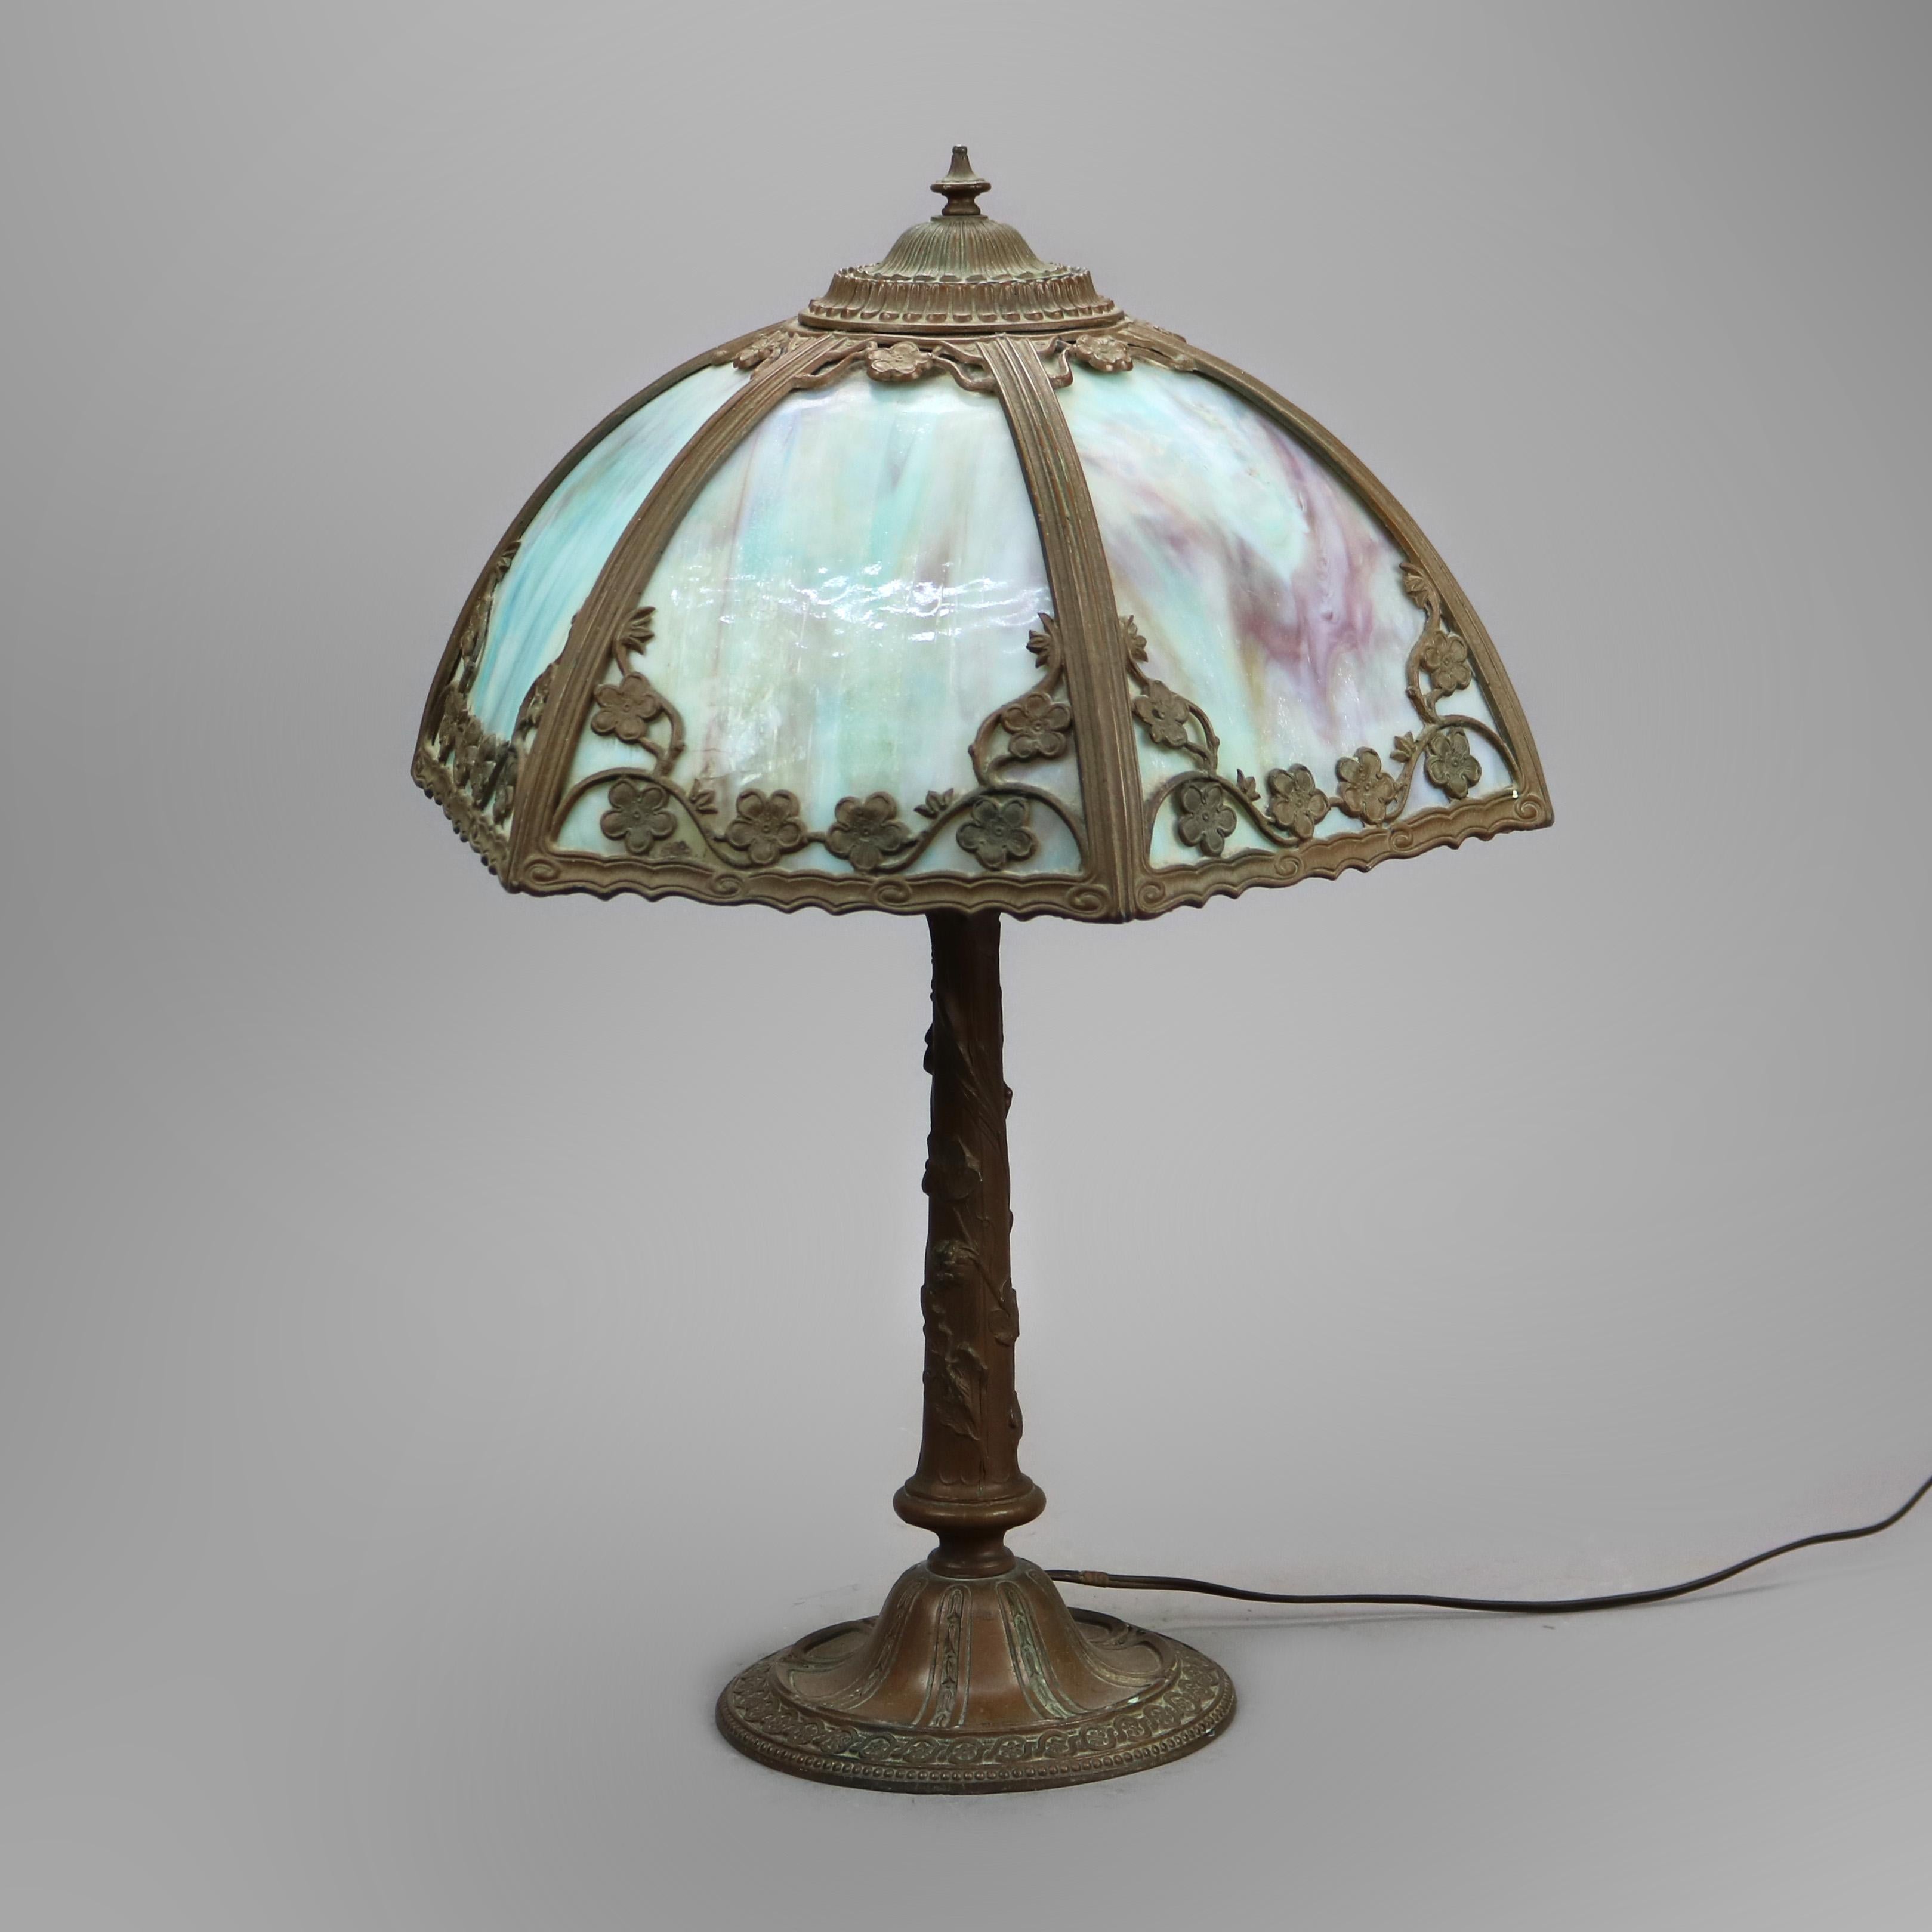 An antique Arts & Crafts table lamp in the manner of Bradley and Hubbard offers cast foliate filigree shade housing bent slag glass panels over single socket cast base, maker mark on base as photographed, c1920

Measures - 22.5'' H x 14.75'' W x